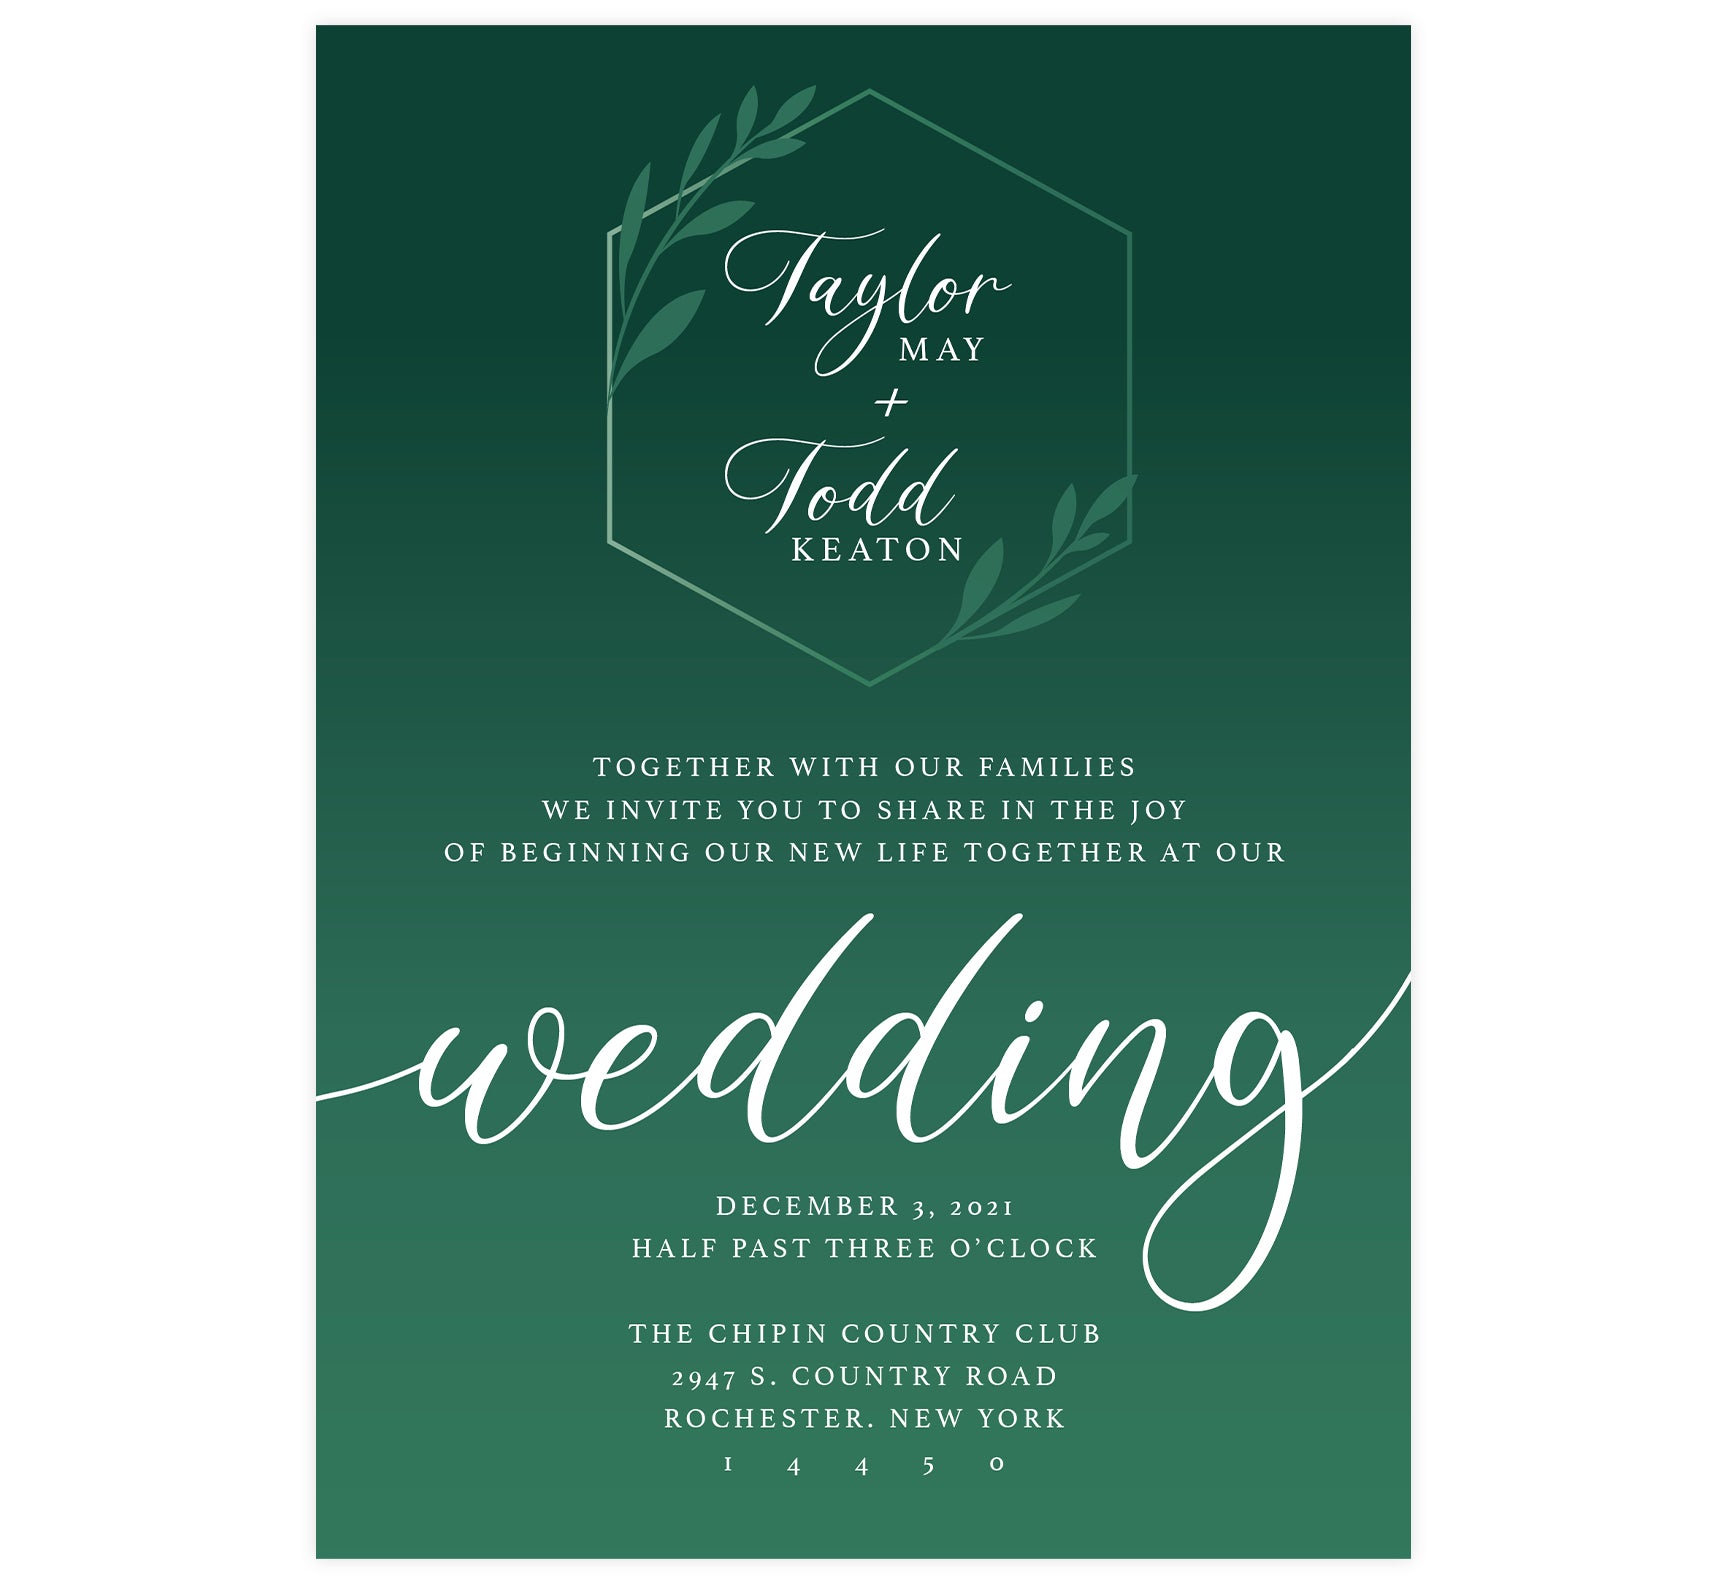 Emerald Green Wedding invitation; white text with dark emerald green background and lighter green geometric shape and leaves